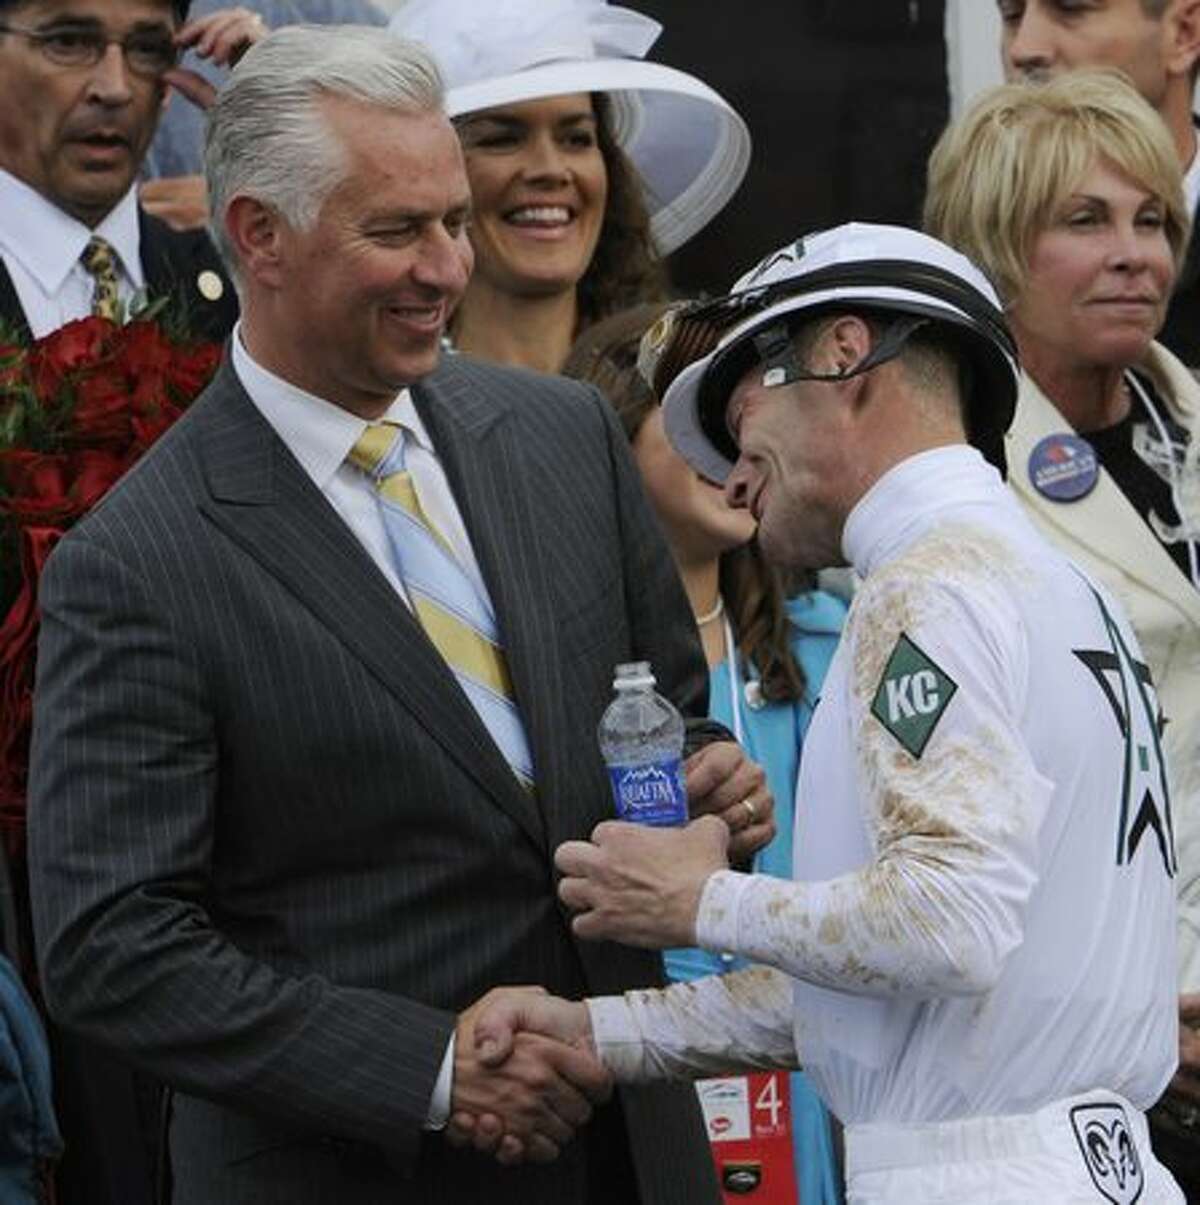 Jockey Calvin Borel is congratulated by Trainer Todd Pletcher after his first win and Borel's third Kentucky Derby win on Super Saver at Churchill Downs in Louisville, Kentucky May 1, 2010. (Skip Dickstein / Times Union)